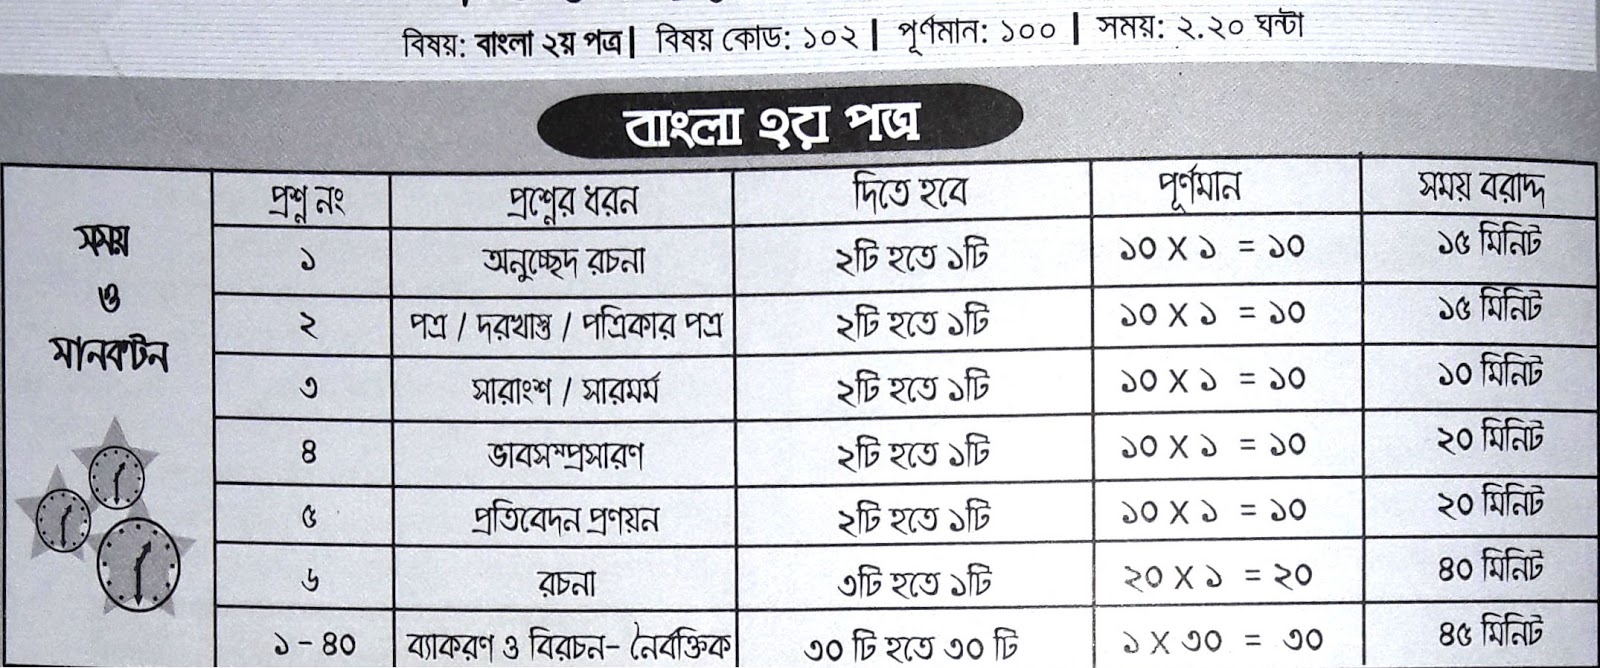 ssc Bangla 2nd Paper suggestion, question paper, model question, mcq question, question pattern, syllabus for dhaka board, all boards